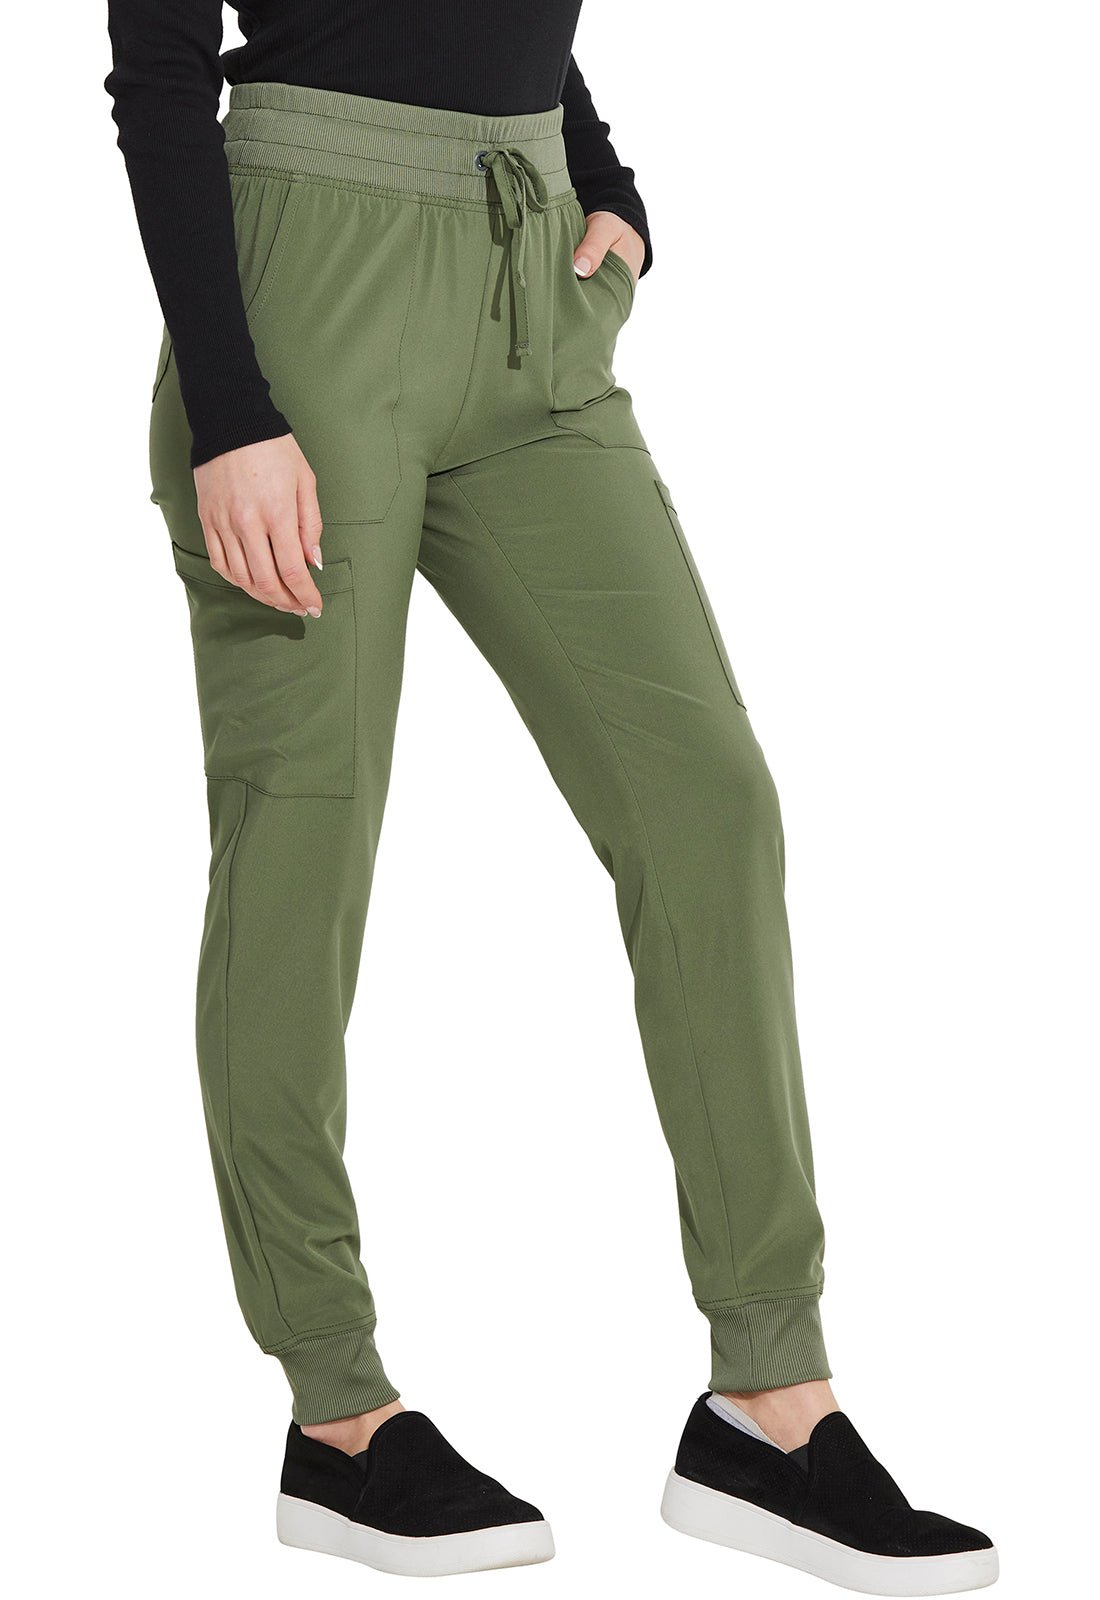 Dickies EDS Essentials Jogger Pant DK065 in Hunter, Heather Royal, Olive, White - Scrubs Select